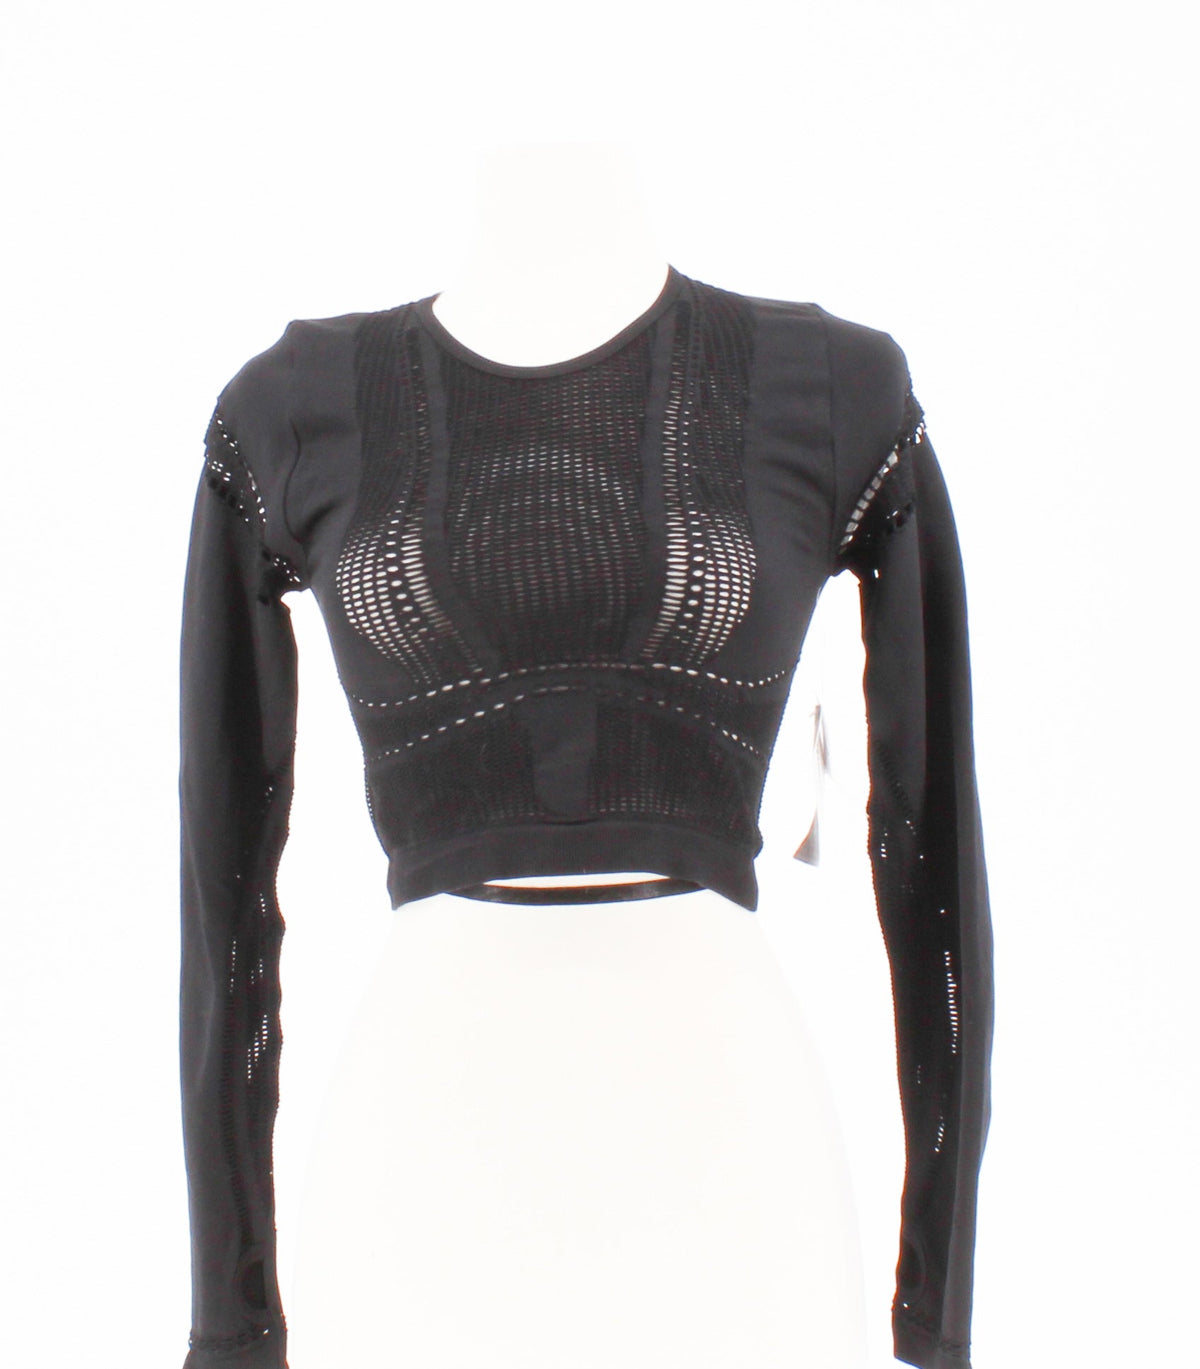 Fashion Nova ACTIVE Crop Top with Sleeves